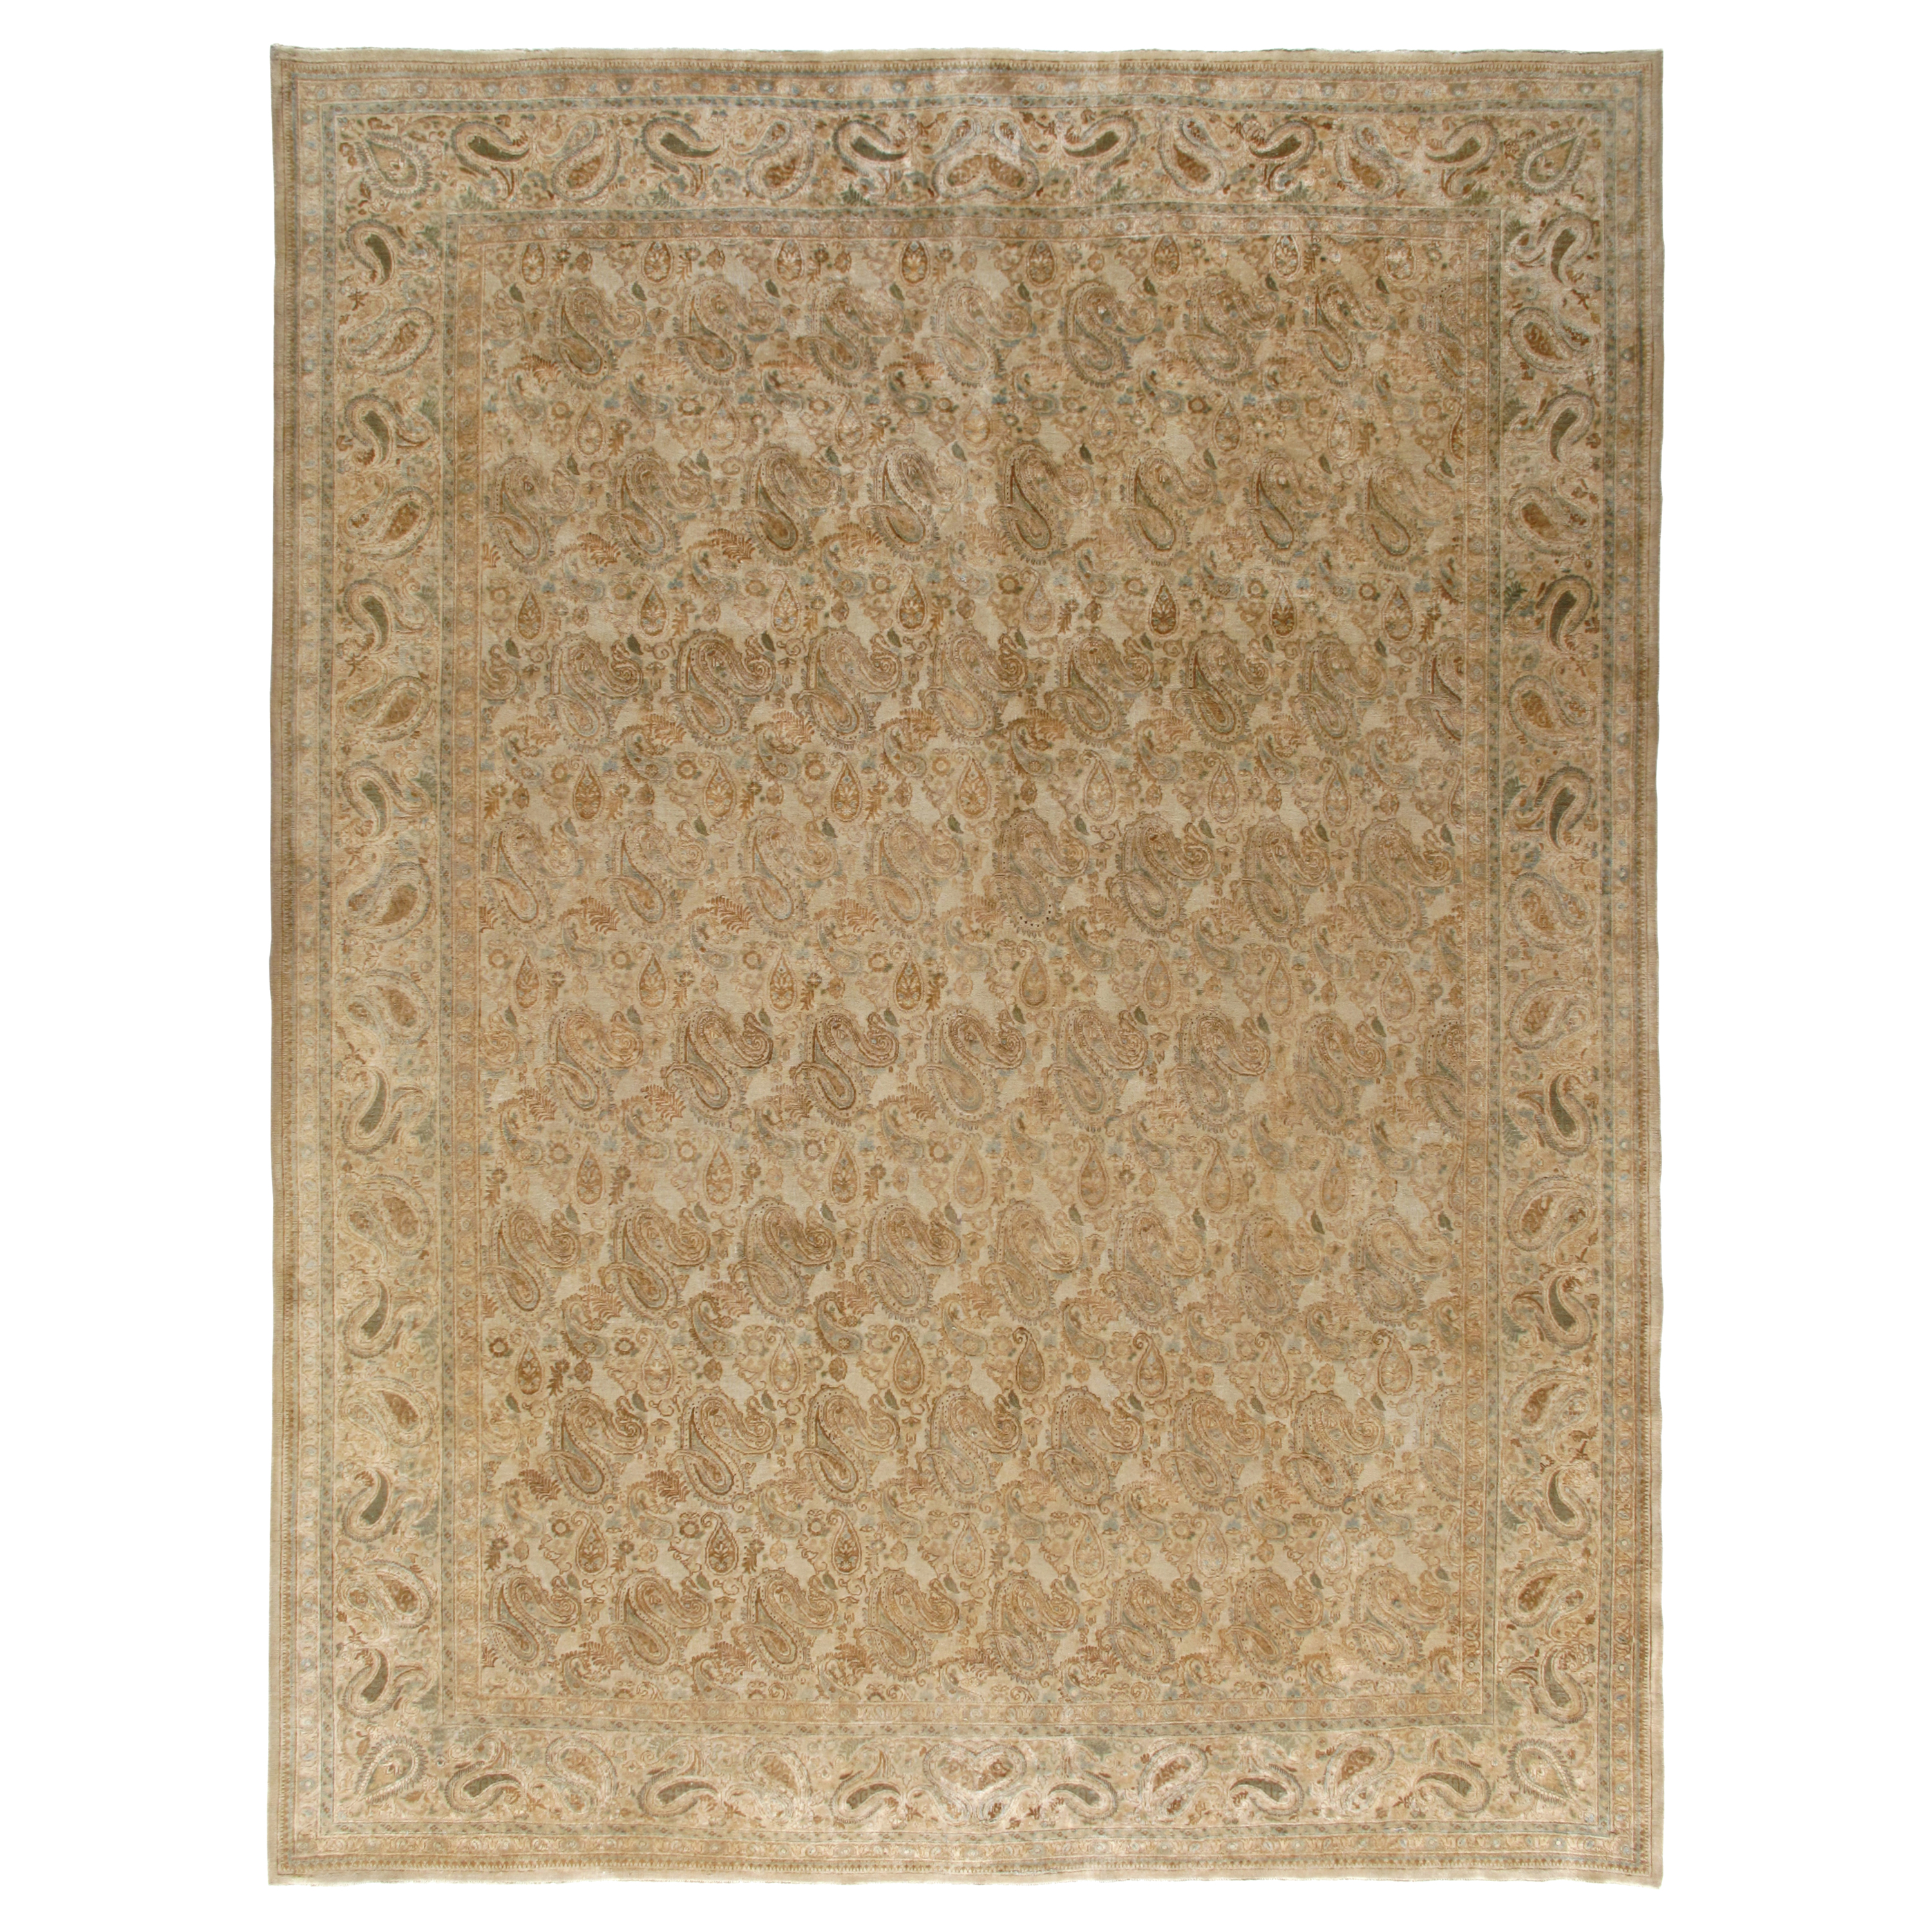 This Khotan rug hand-knotted.